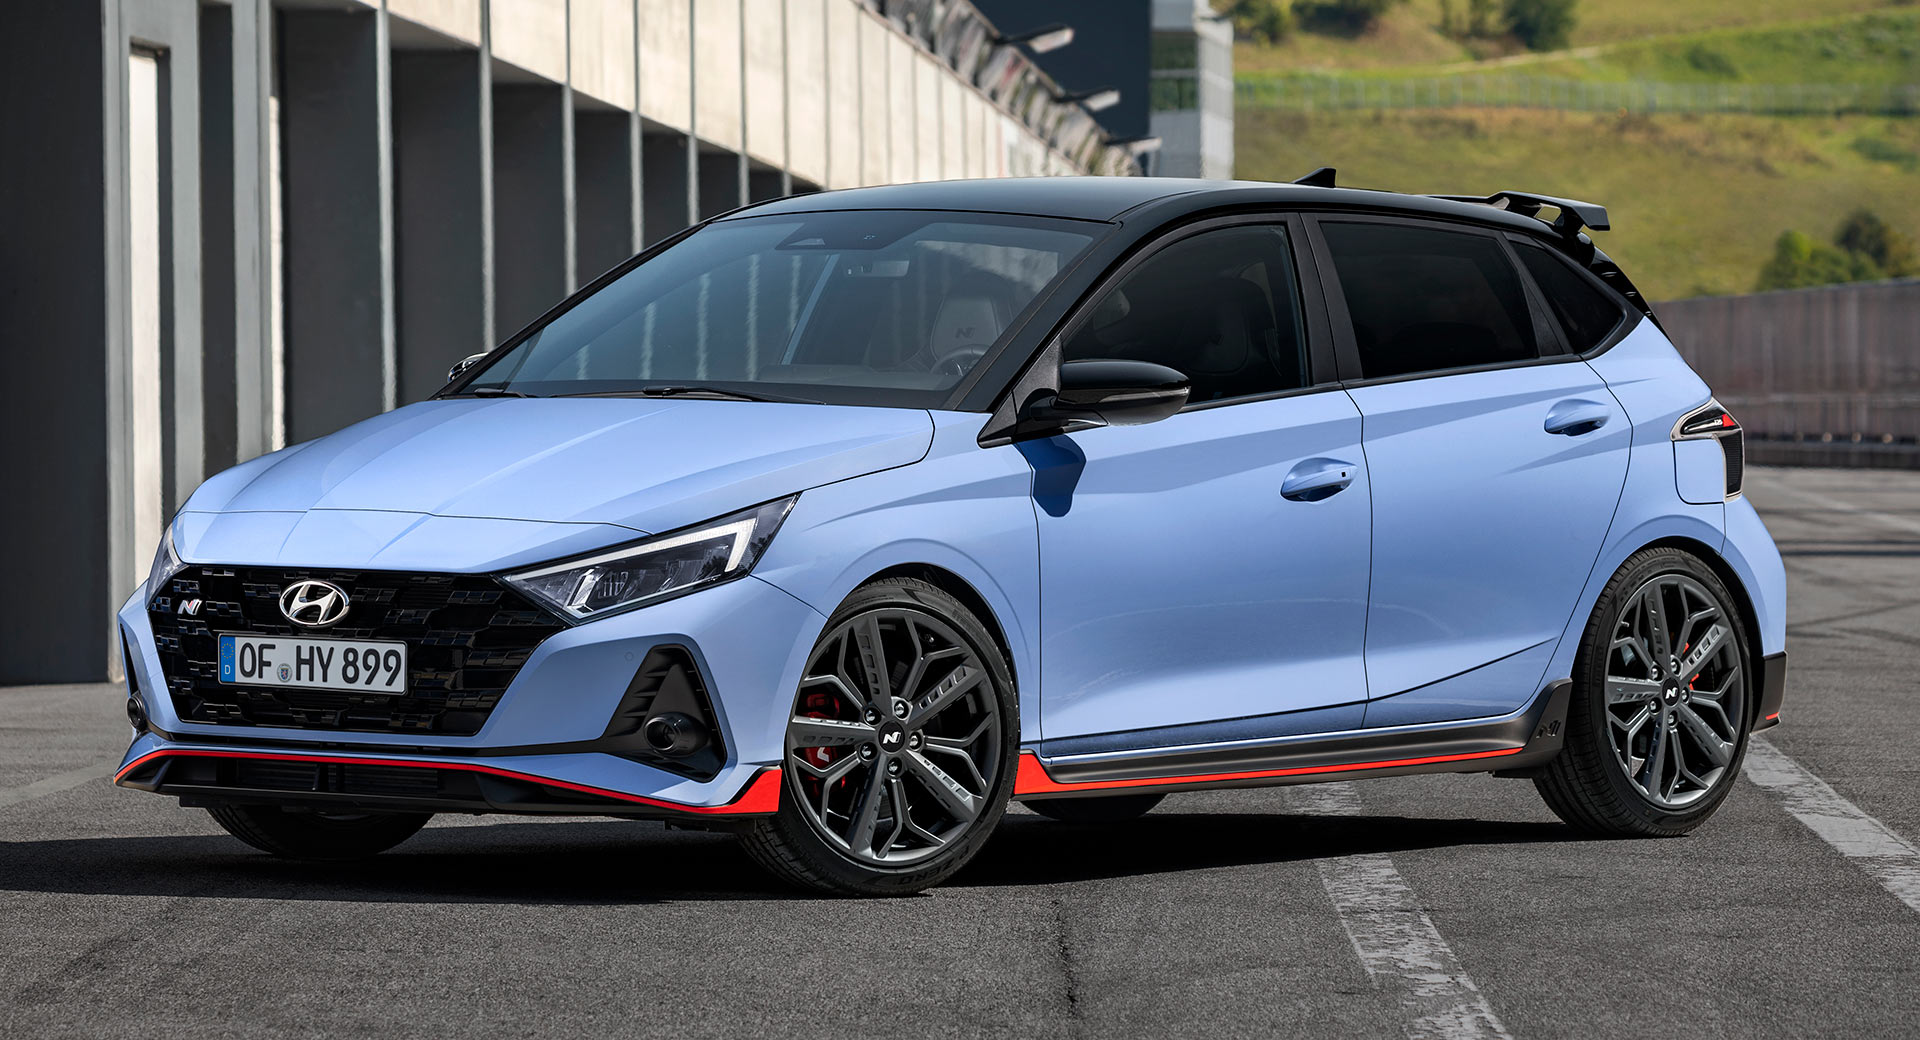 2023 Peugeot 208 PSE: Here's What We Know About The Electric